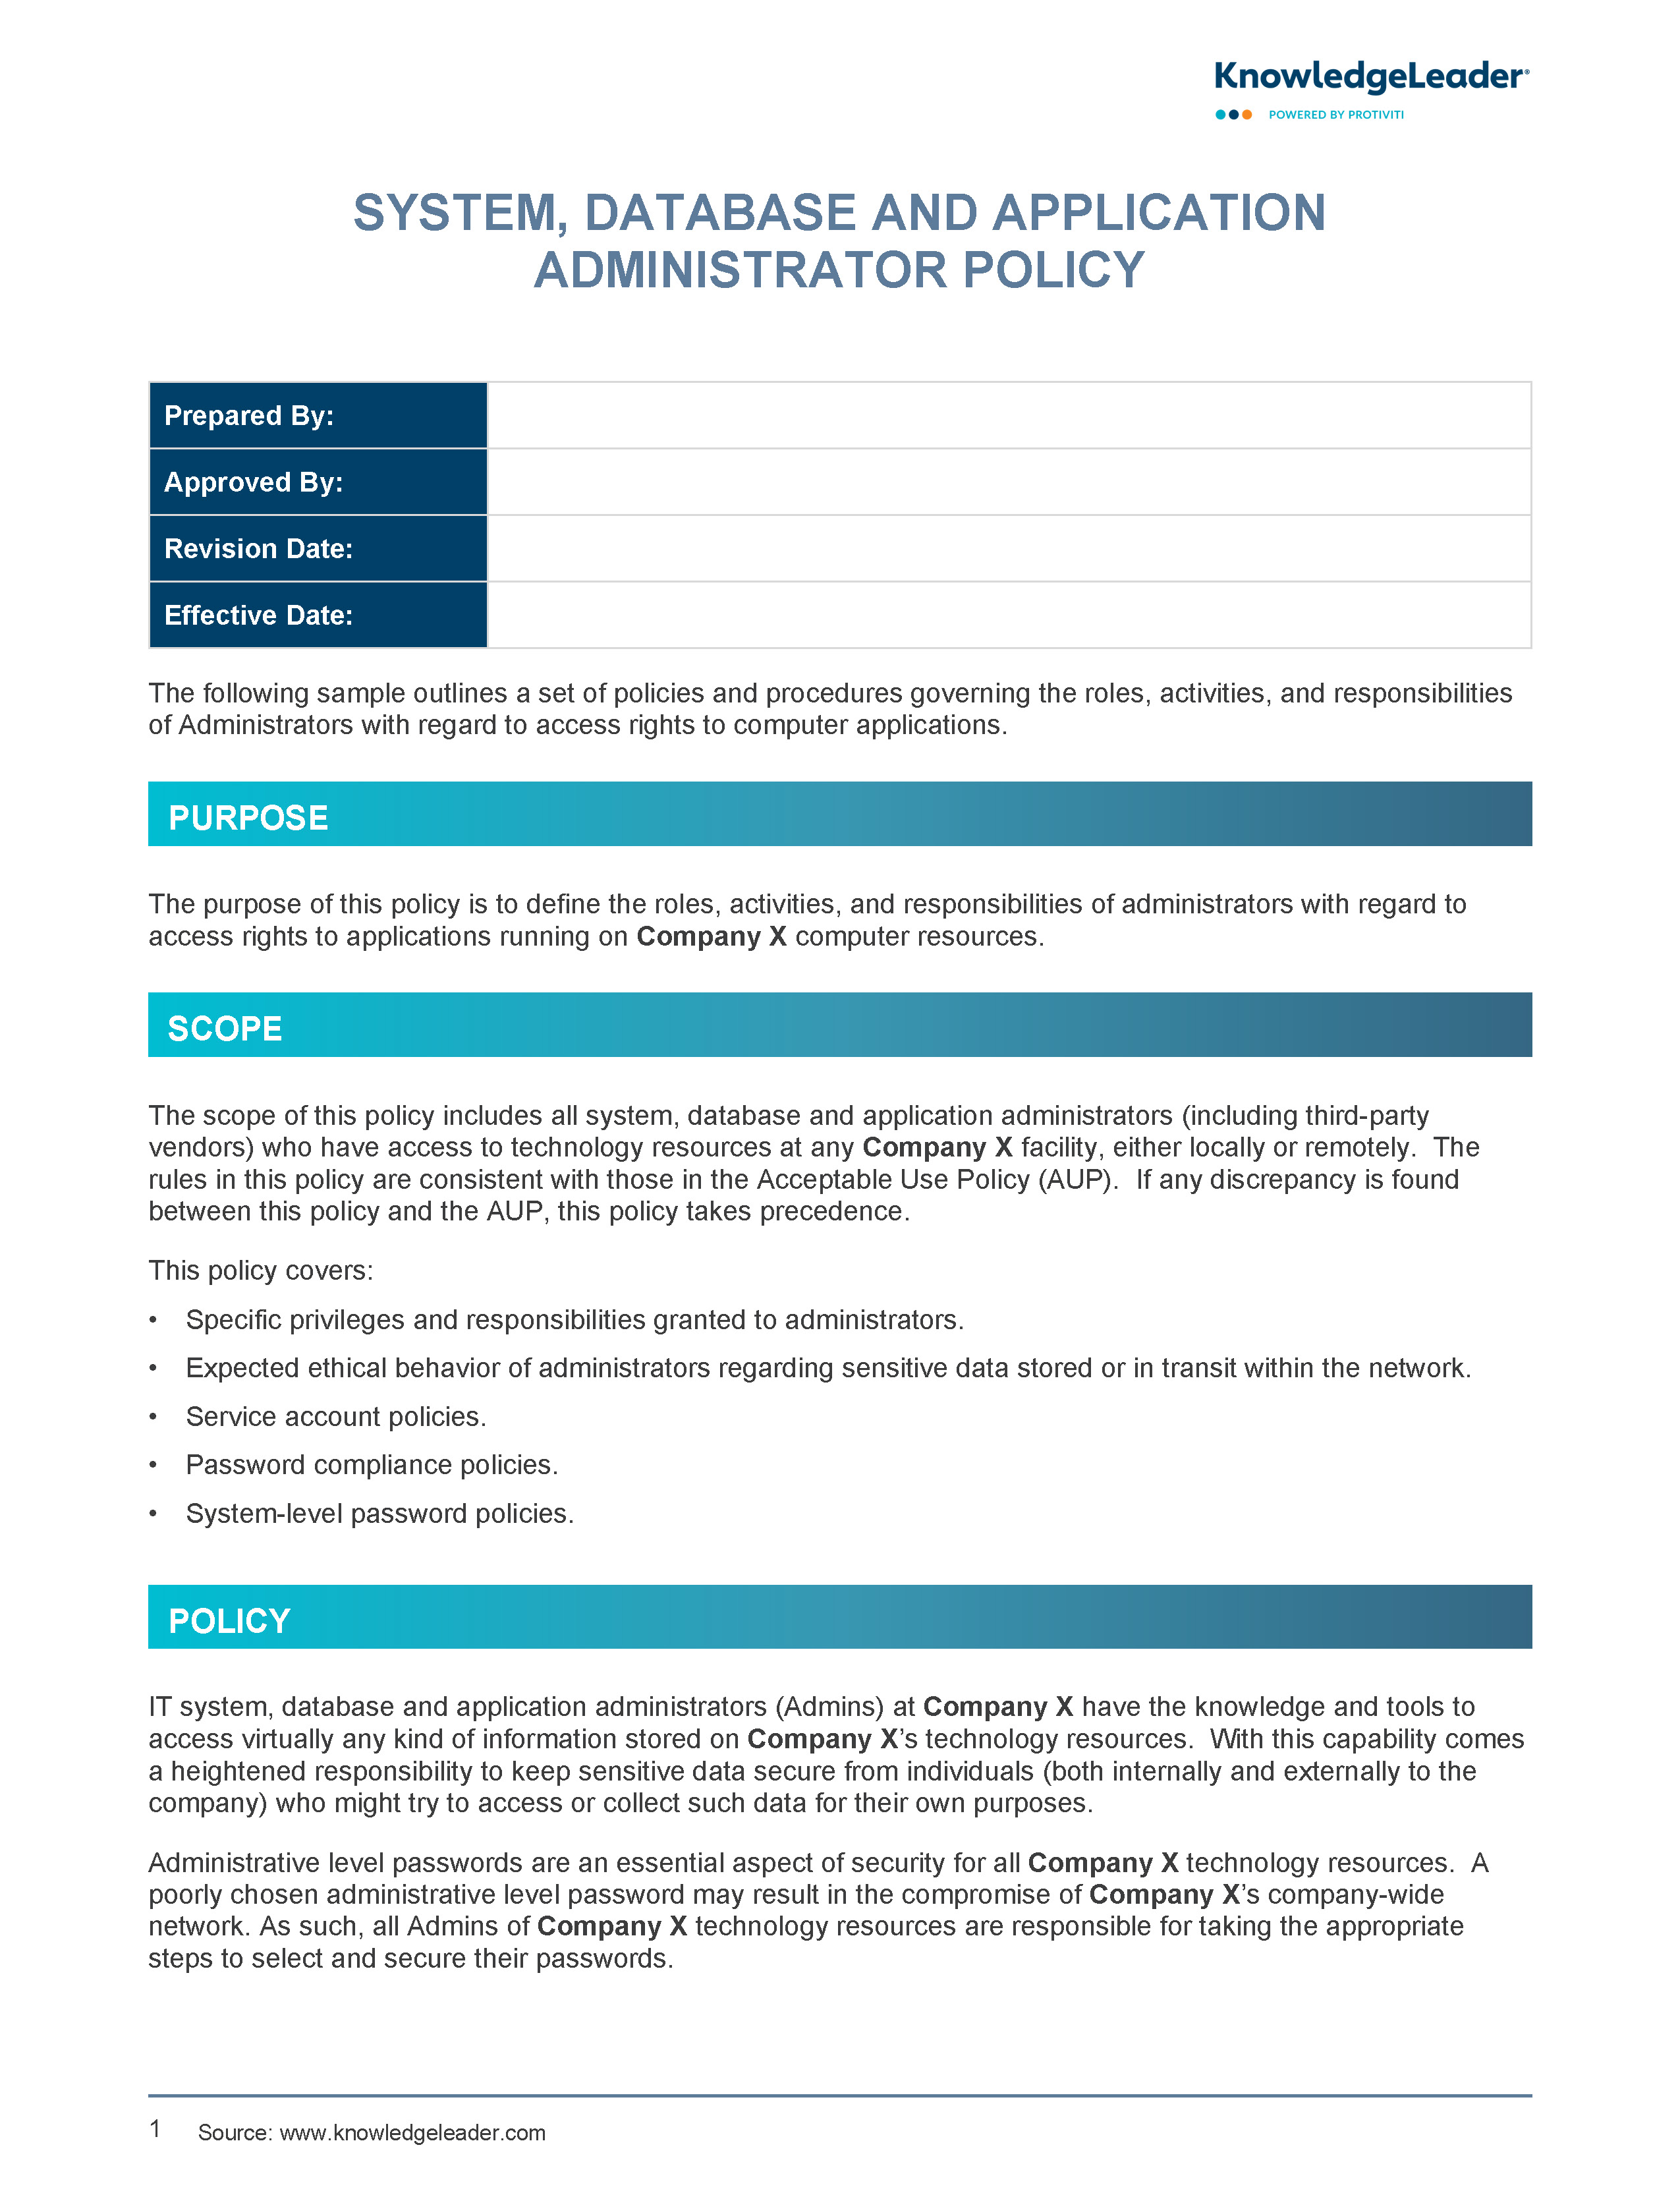 screenshot of the first page of System, Database and Application Administrator Policy